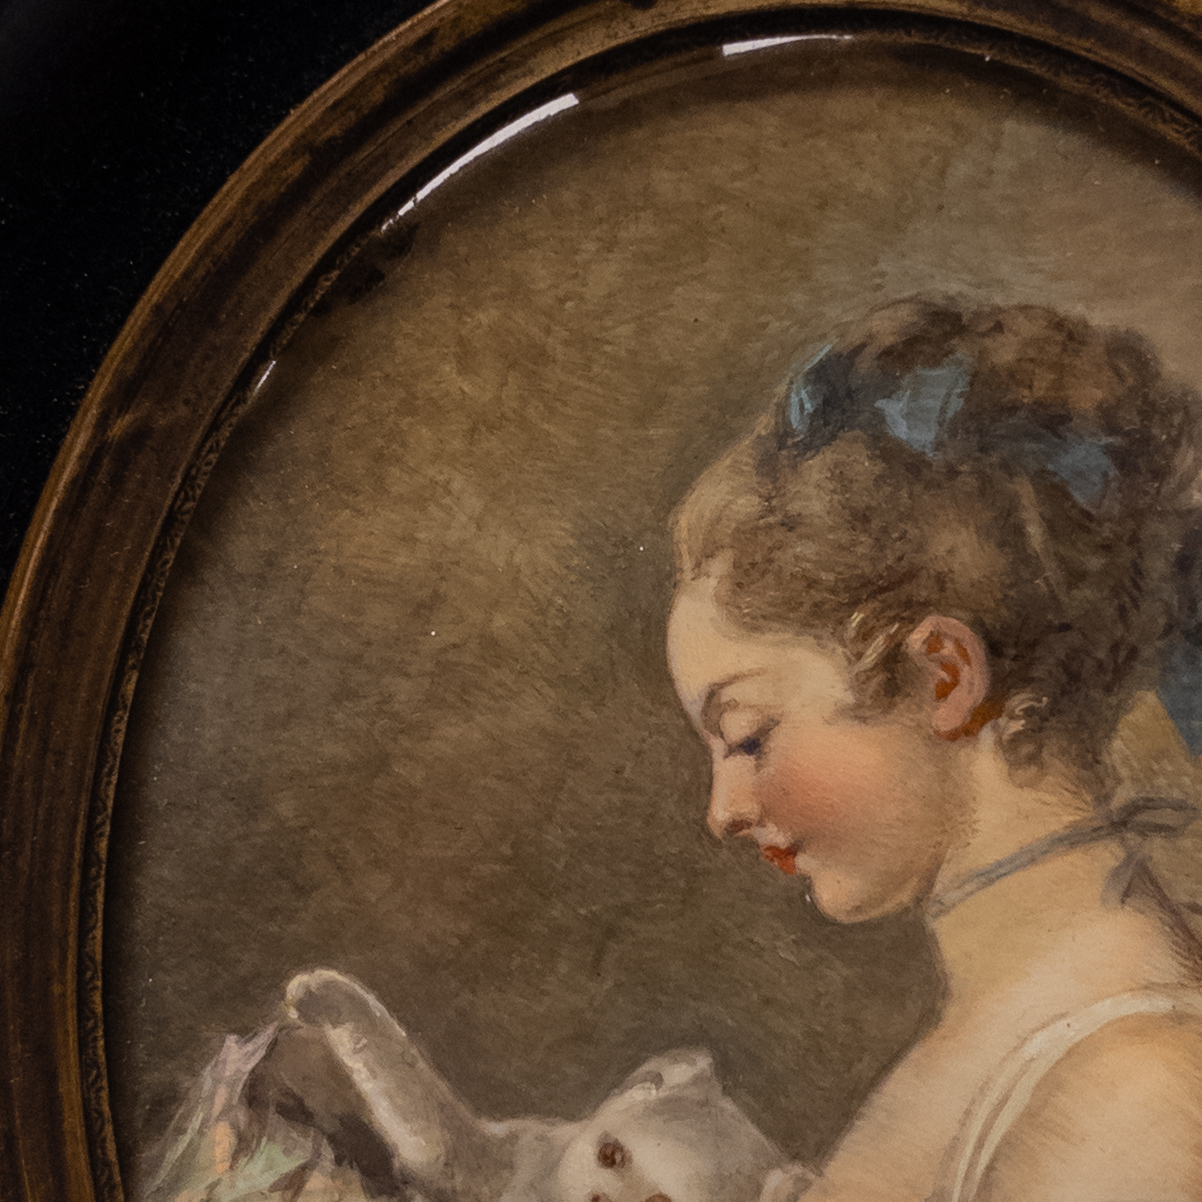 Lady and Cat Victorian Era Small Tempera Painting